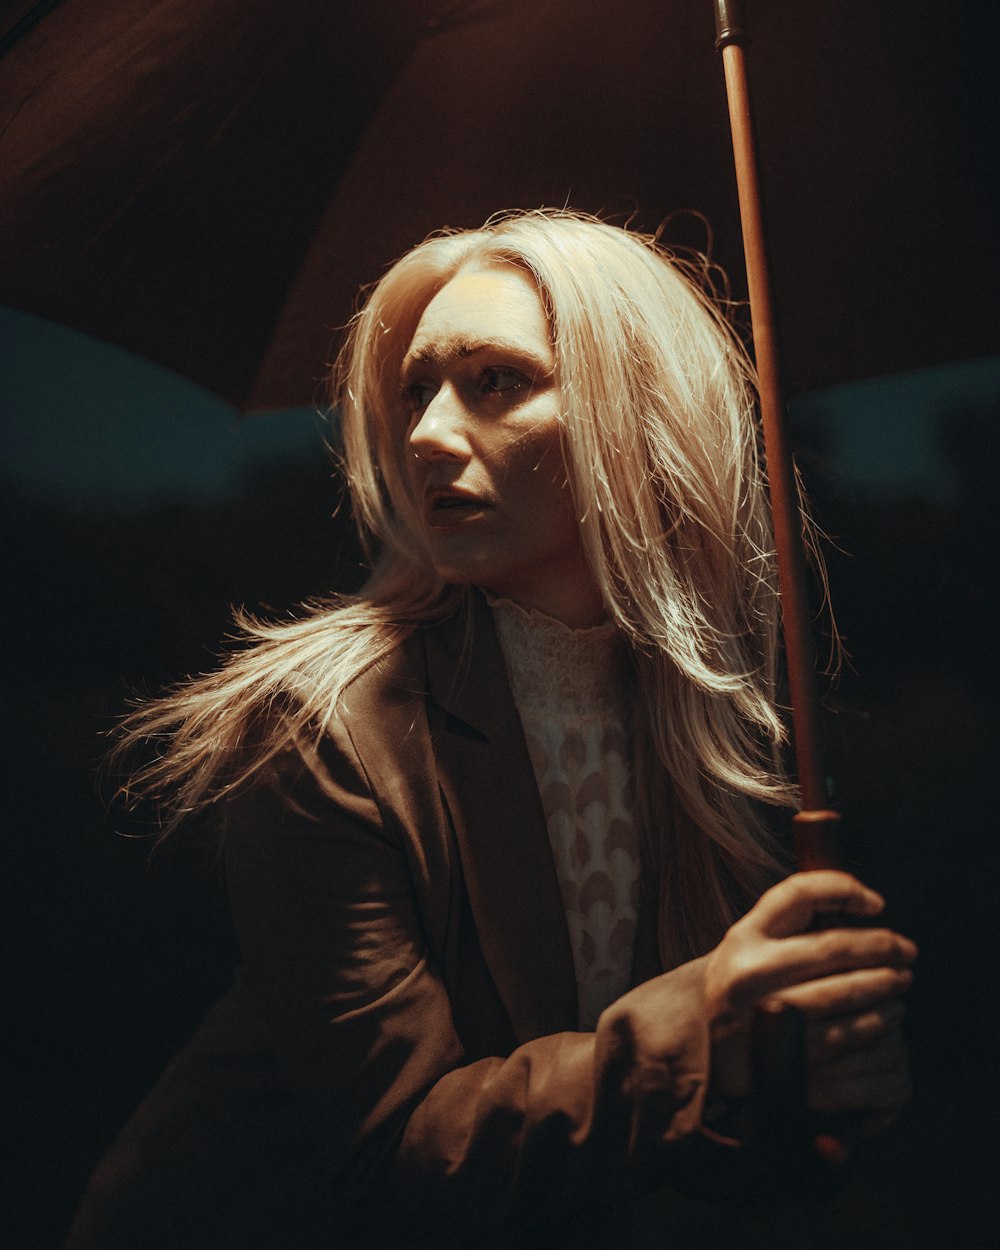 a woman with long blonde hair holding an umbrella